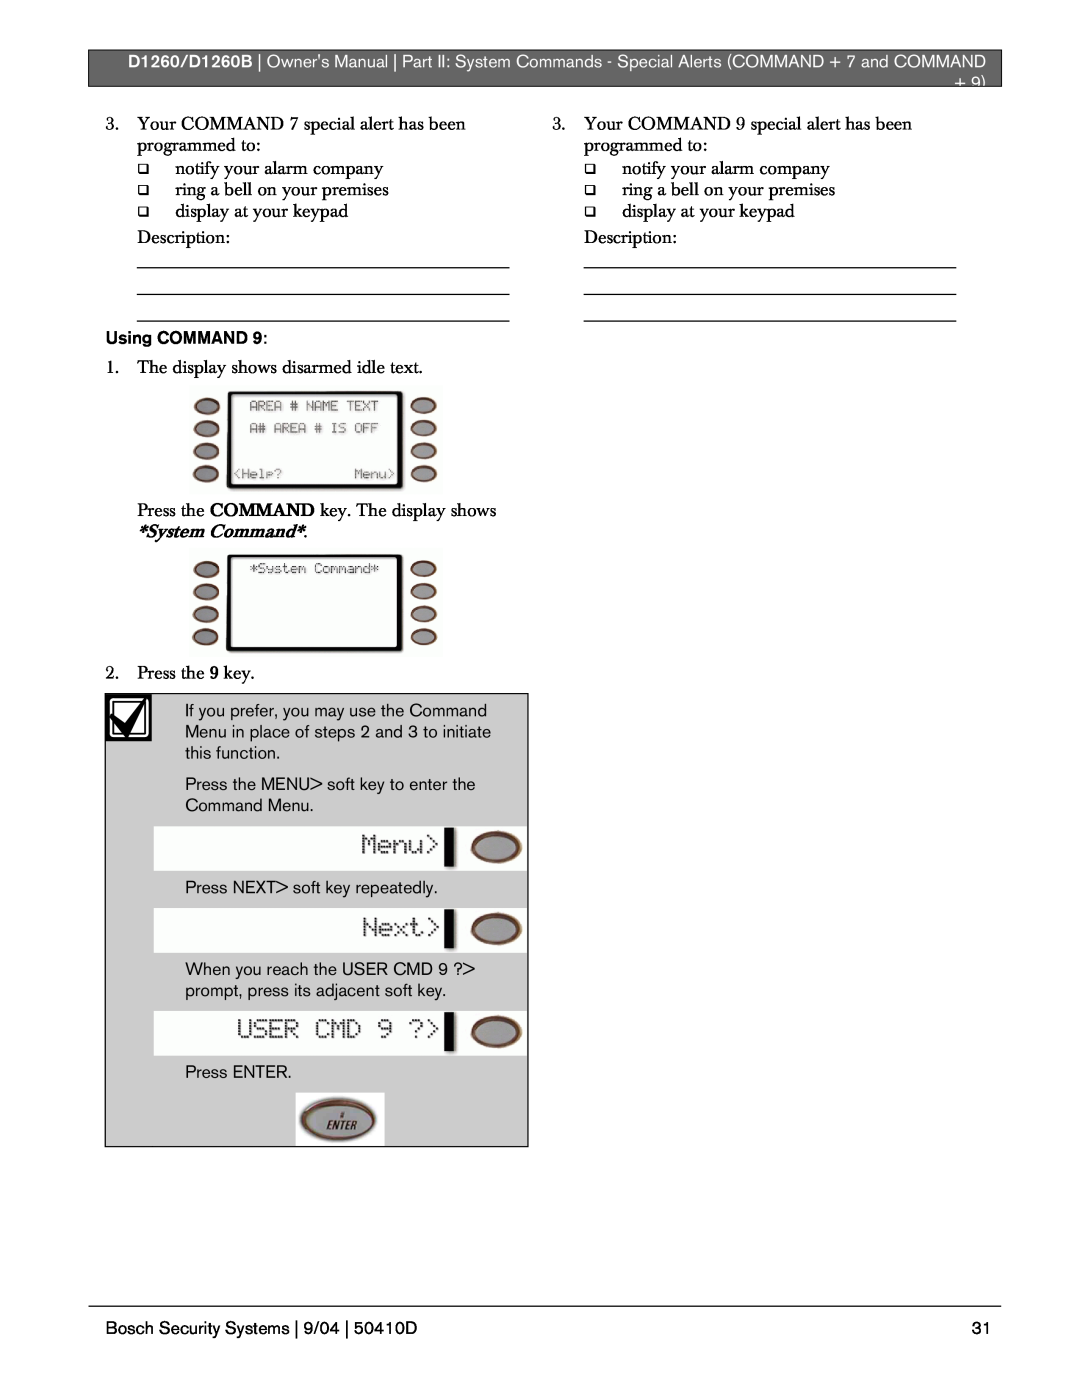 Bosch Appliances D1260B owner manual Using COMMAND 